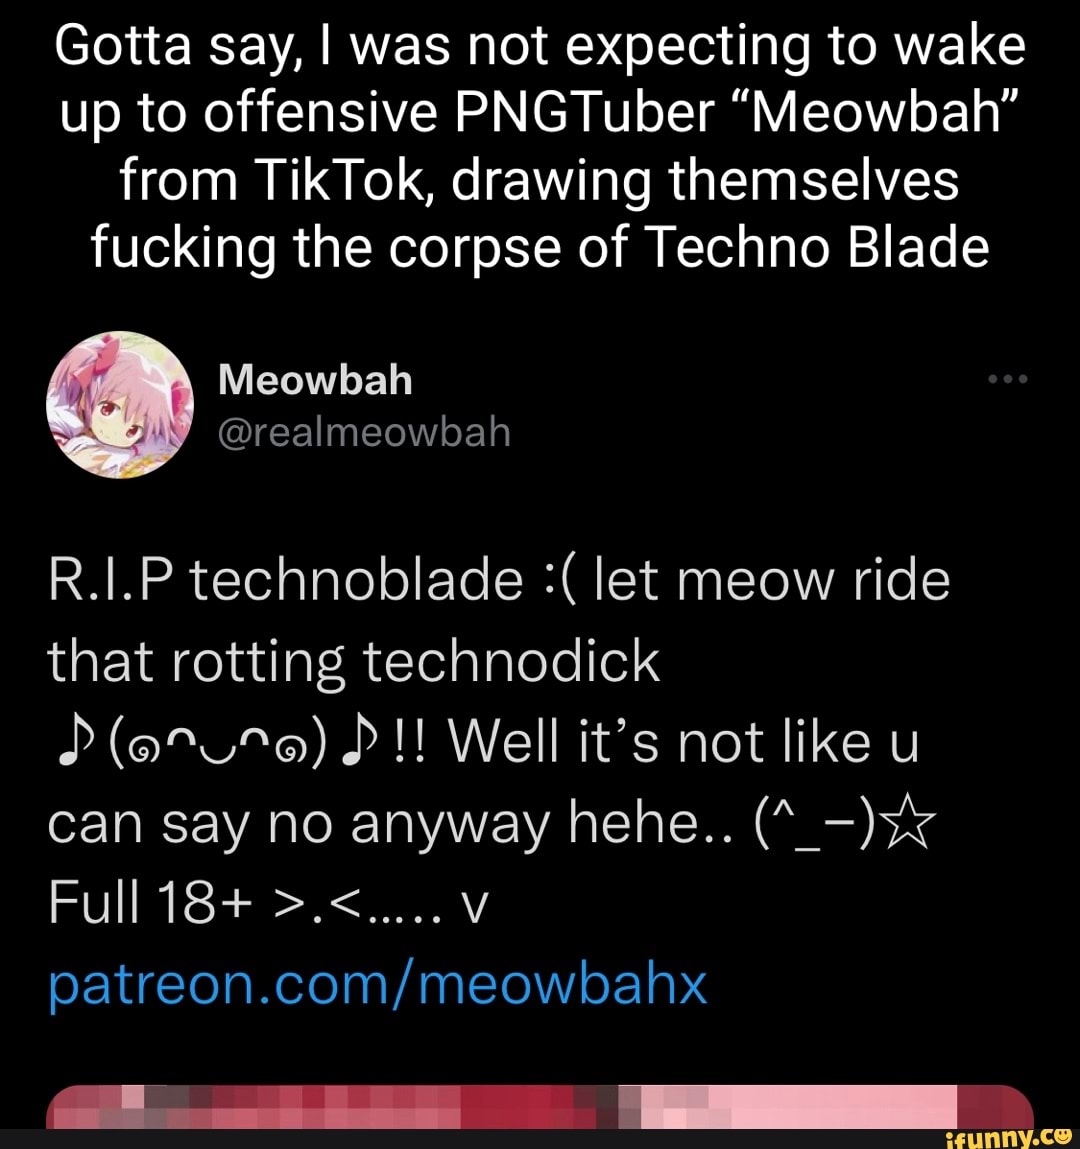 R.1.P technoblade let meow ride that rotting techned Well it's not